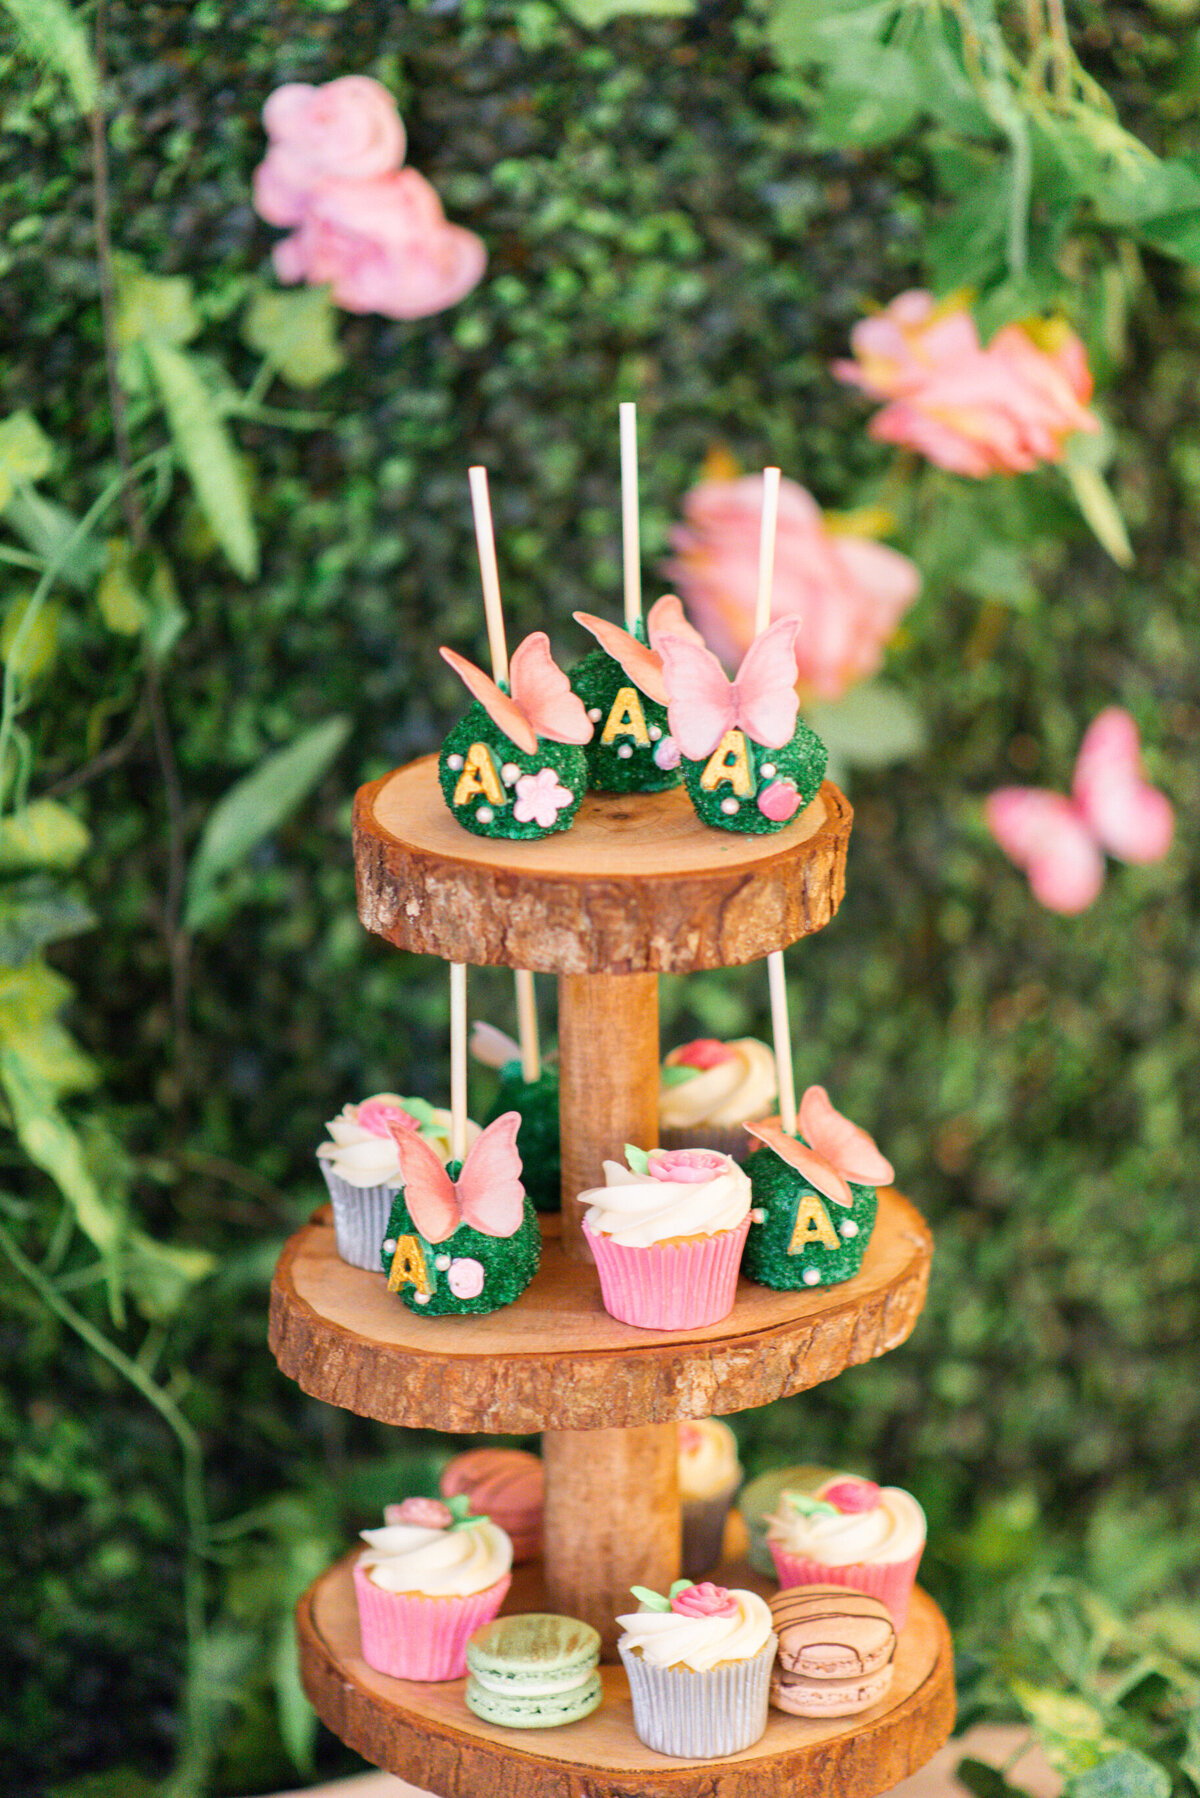 ENCHANTED FOREST BABY SHOWER, IRIODENDRON MANSION